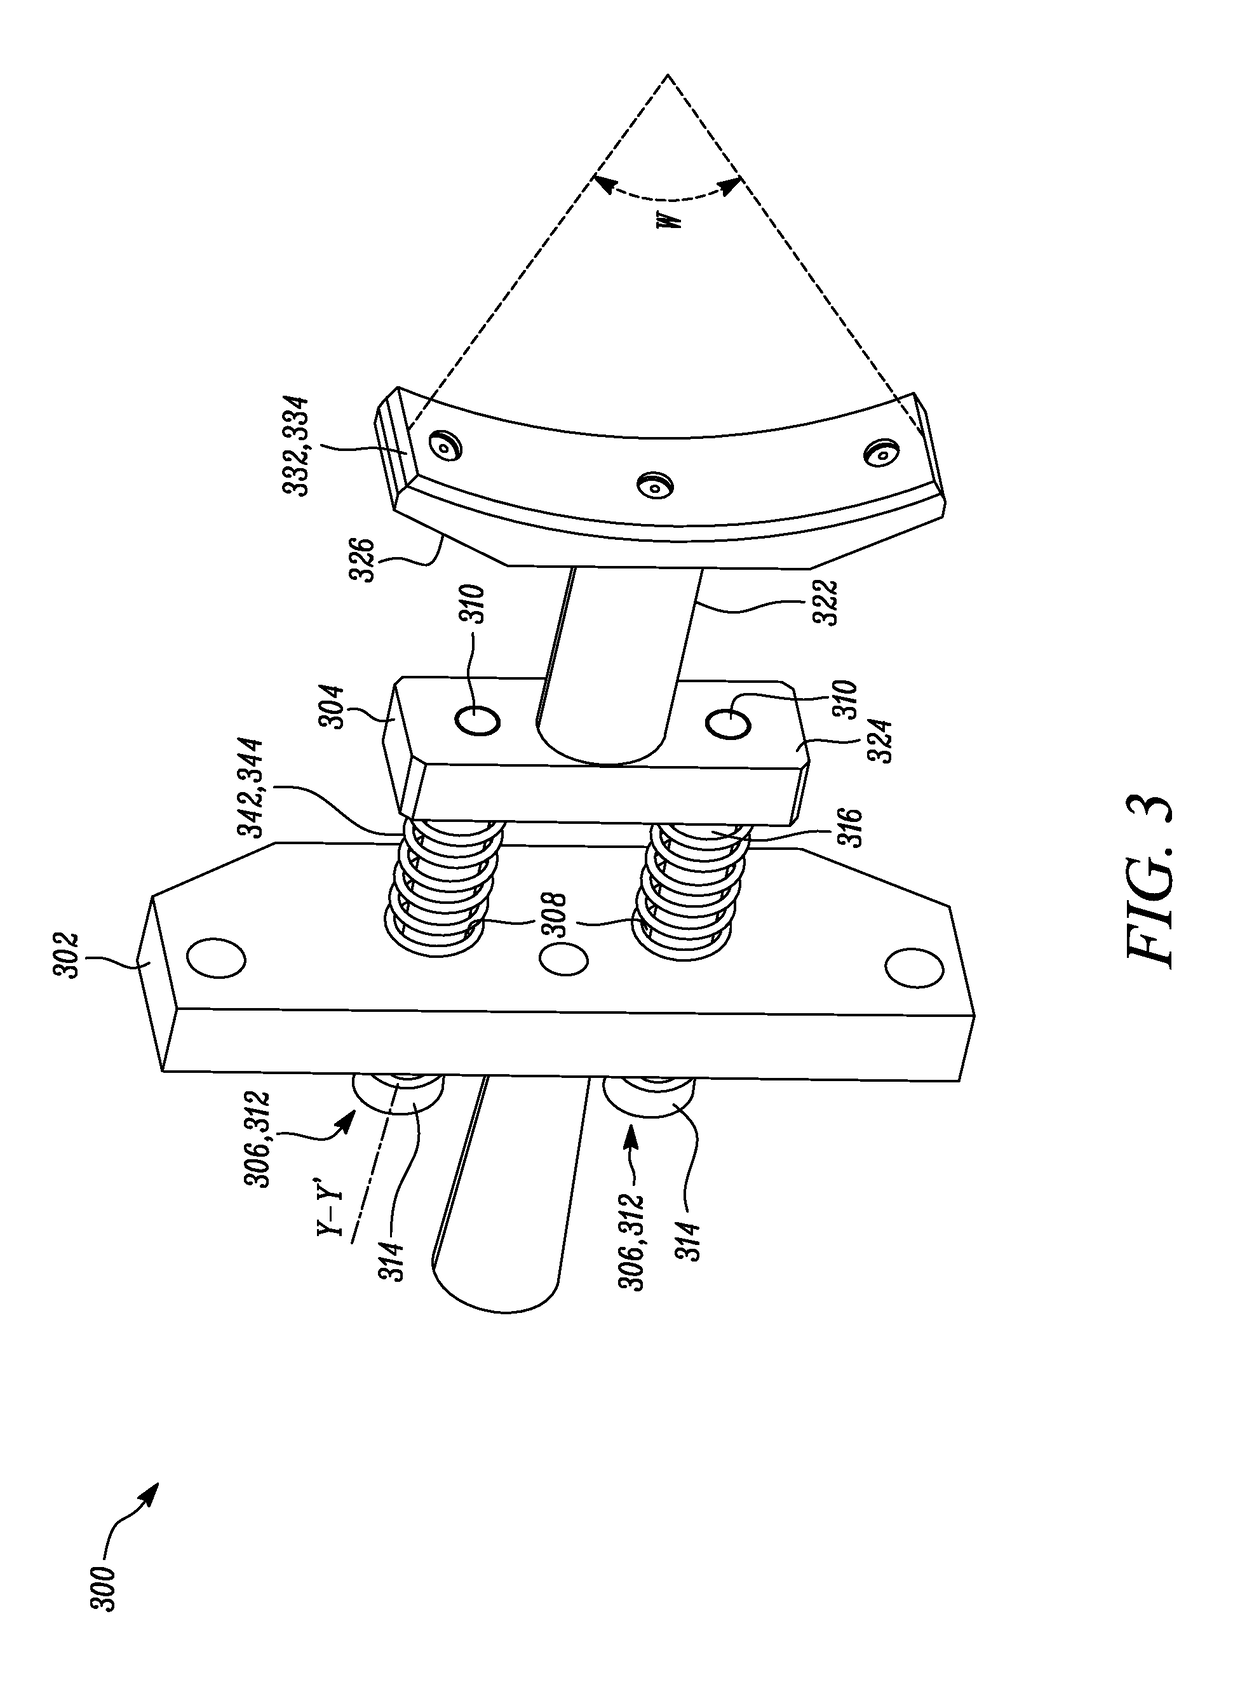 Tool for stabilizing a position of a shaft